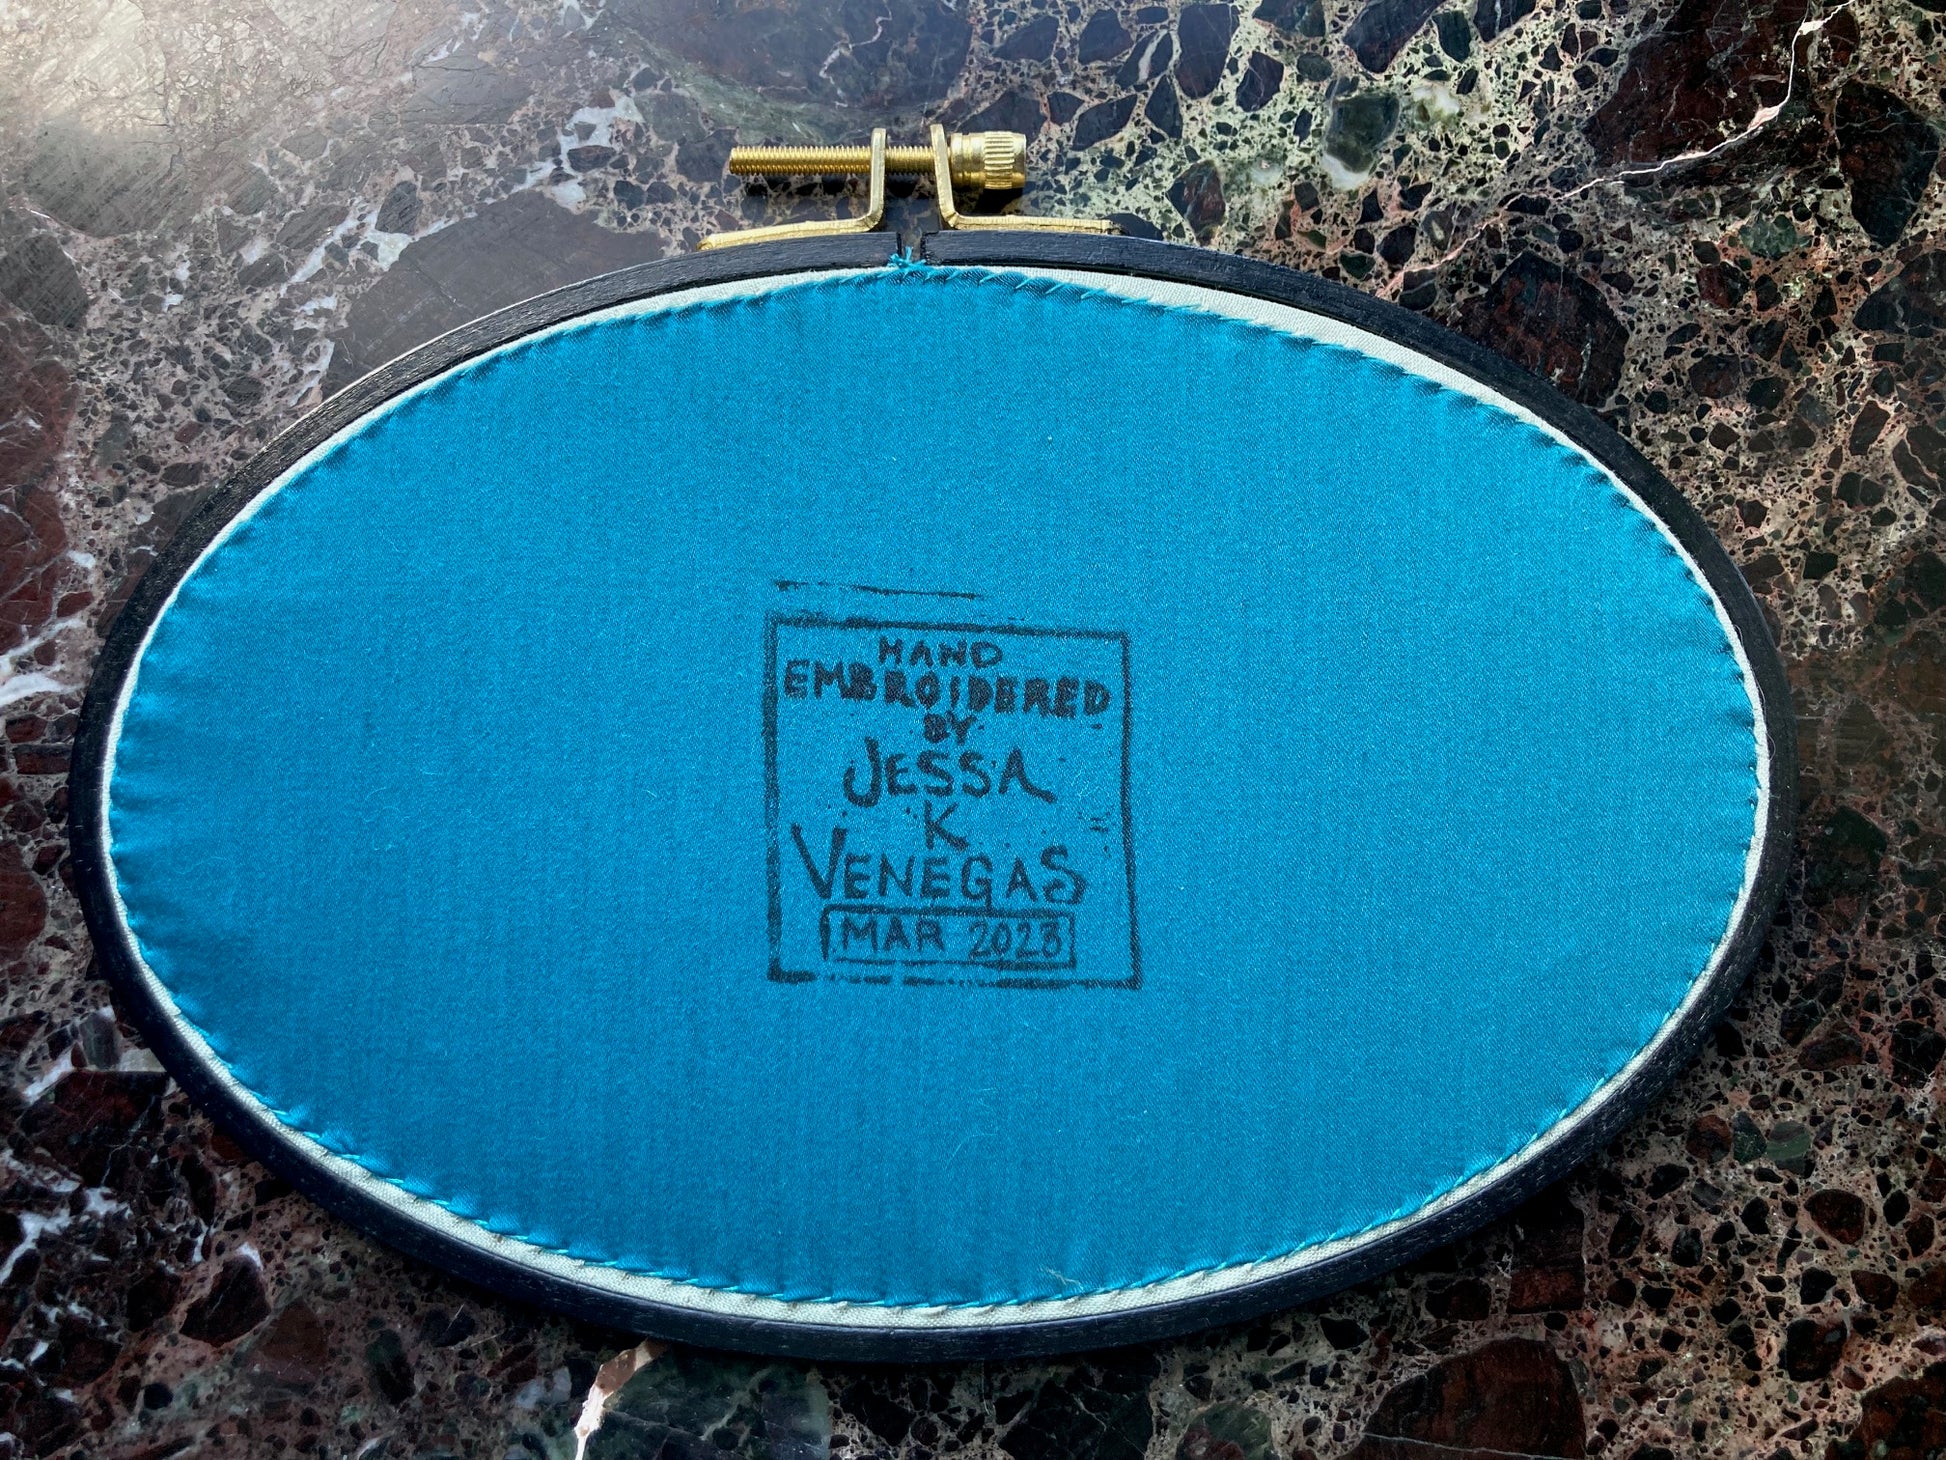 the back of an embroidery hoop is pictured, with teal fabric stitched onto it. There is a printed label on the fabric reading "Hand Embroidered by Jessa K Venegas" and below it is written "March 2023" in ink. 